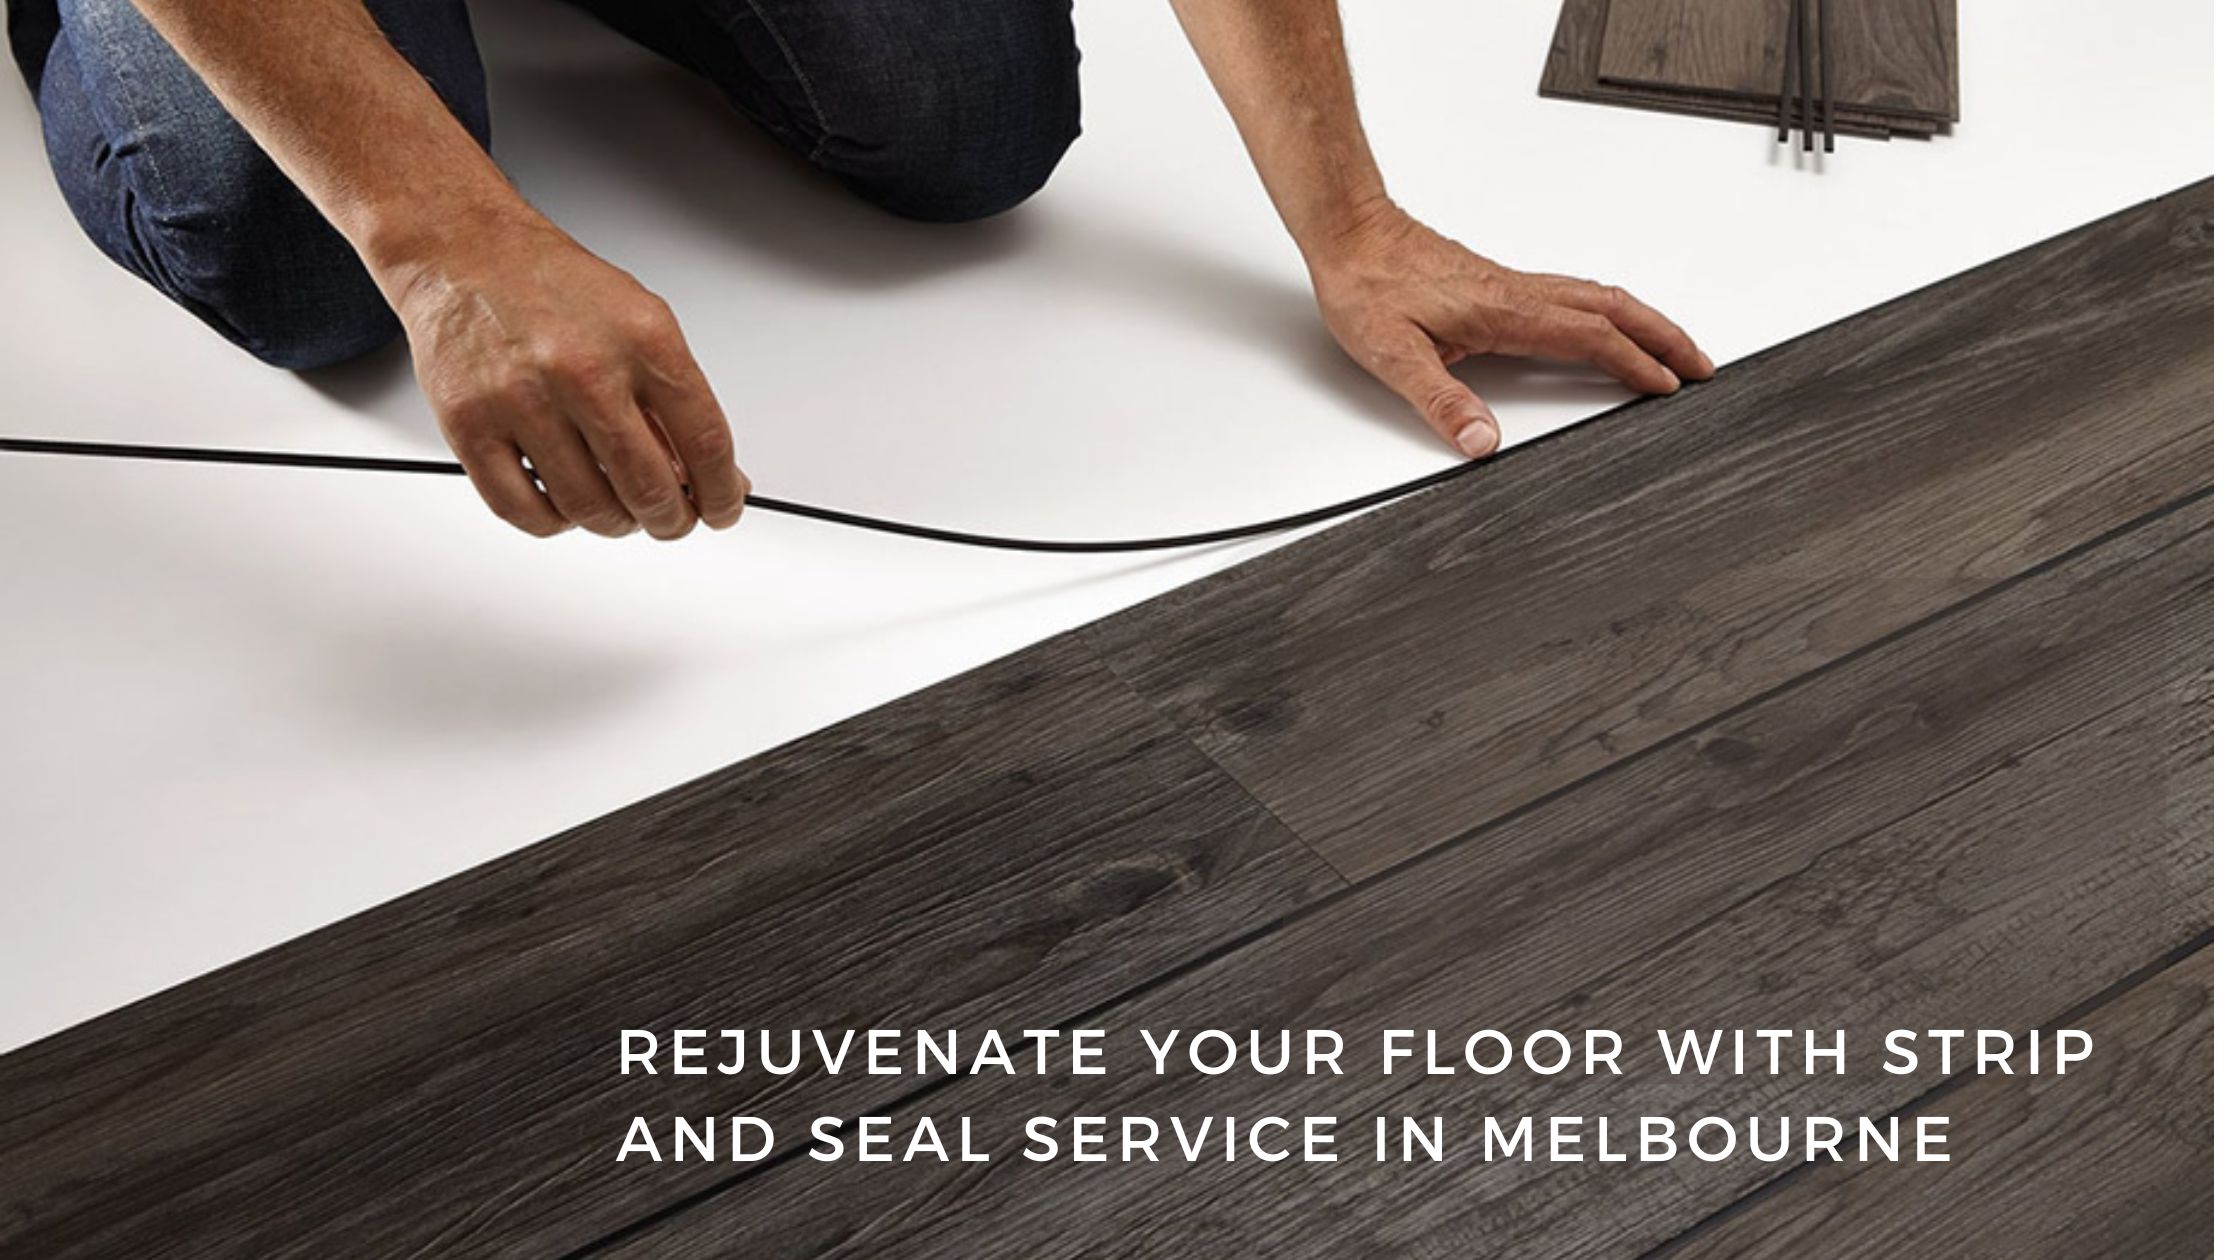 Rejuvenate Your Floor with Strip and Seal Service in Melbourne